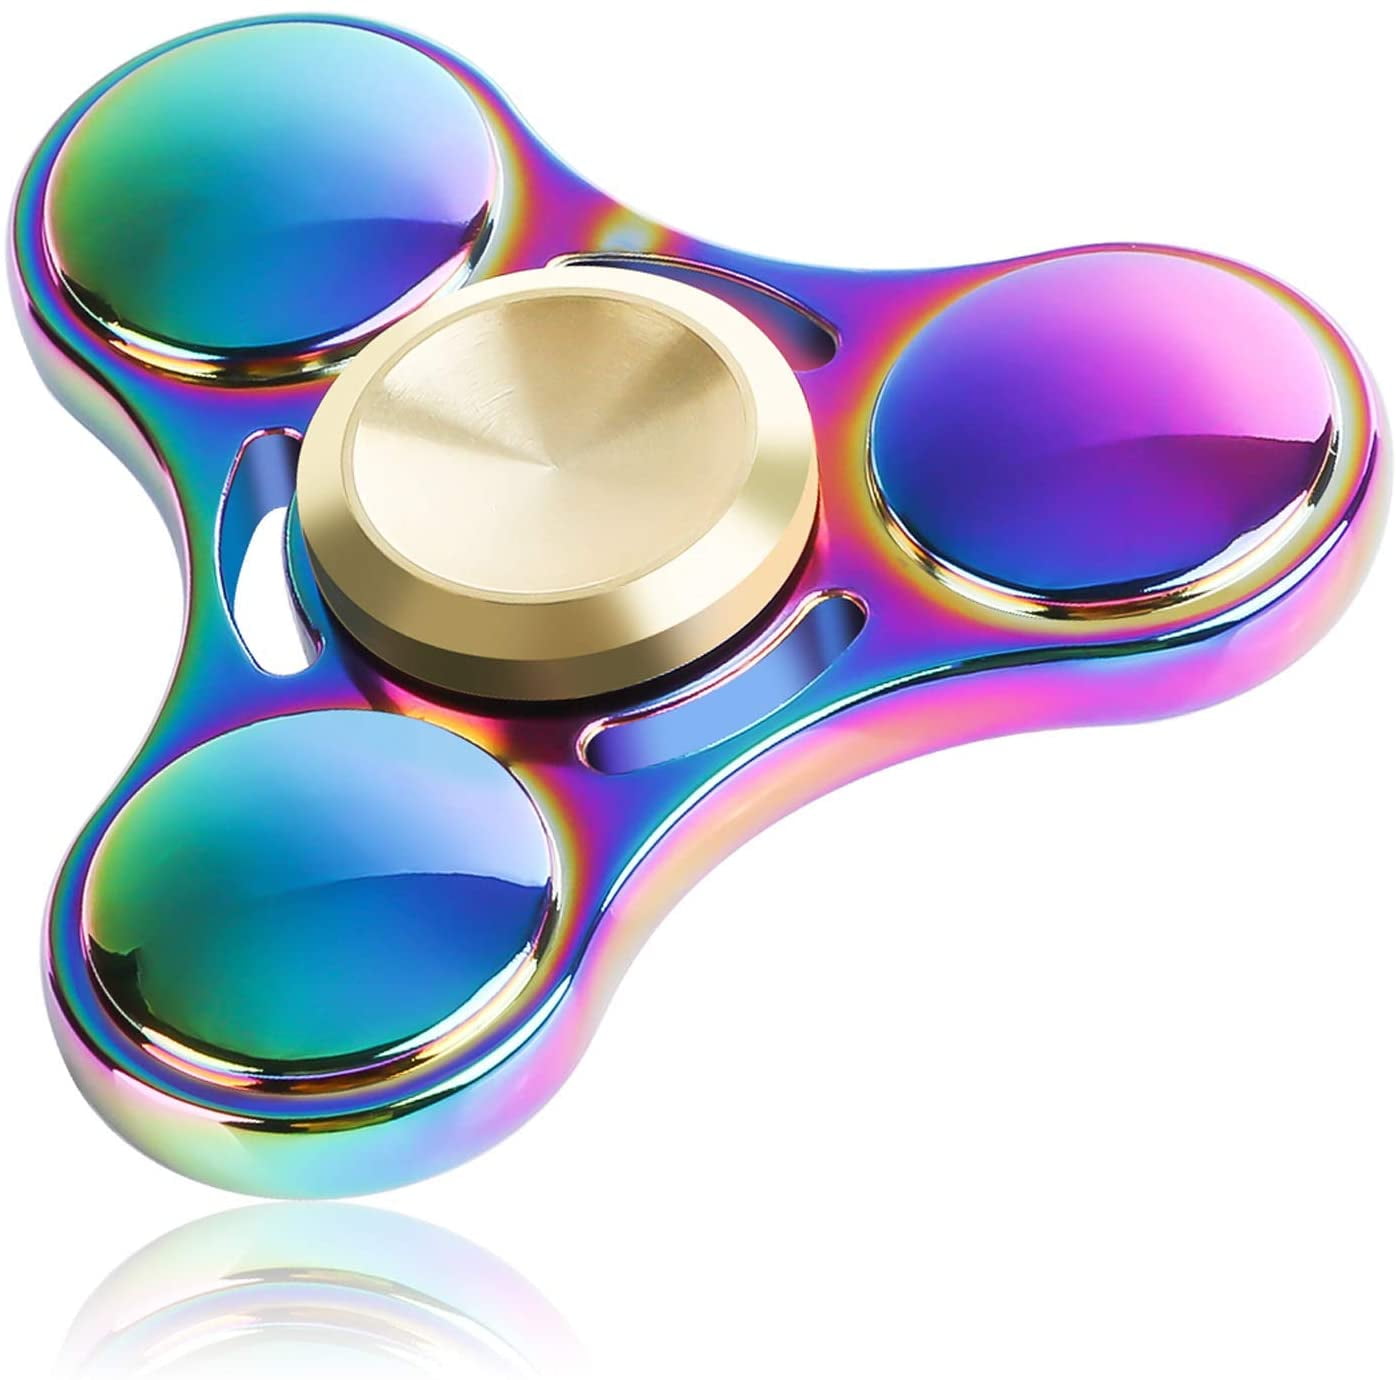 Hand Spinner Tri Fidget Spinner Metal Stress Relieves Focus Toy Gift ADHD BLUE 